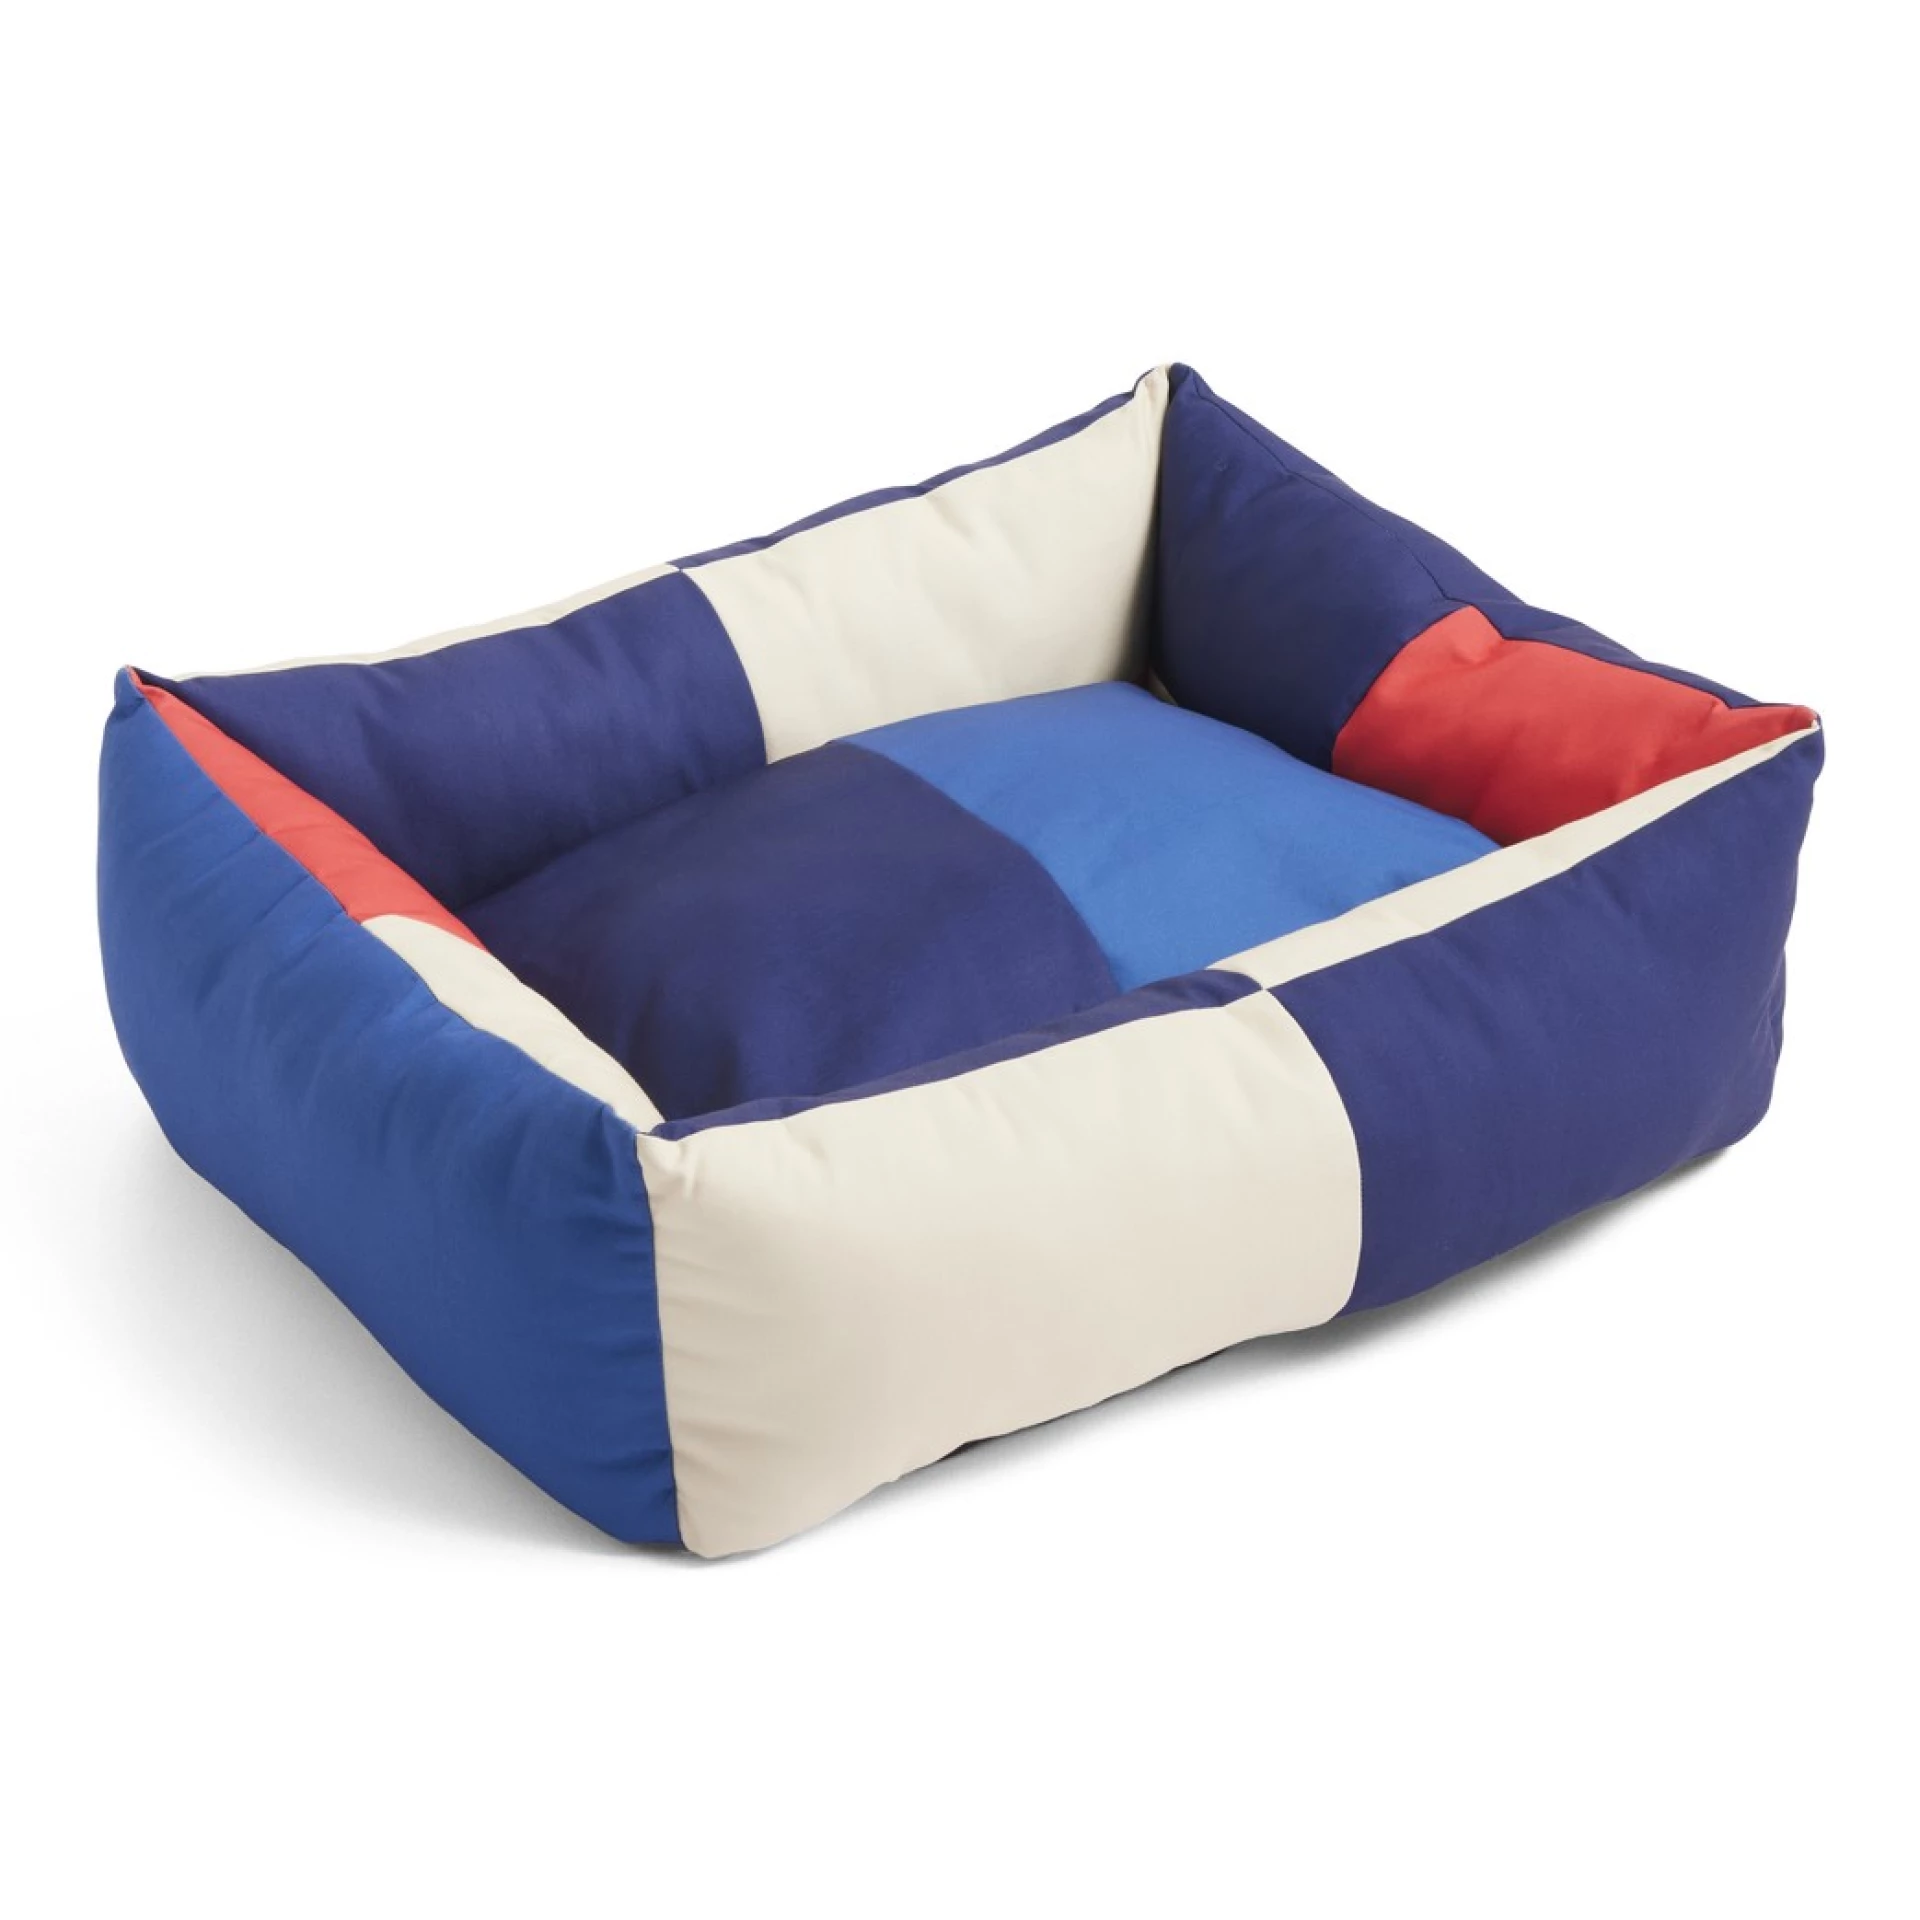 HAY Medium Red and Blue Dogs Bed